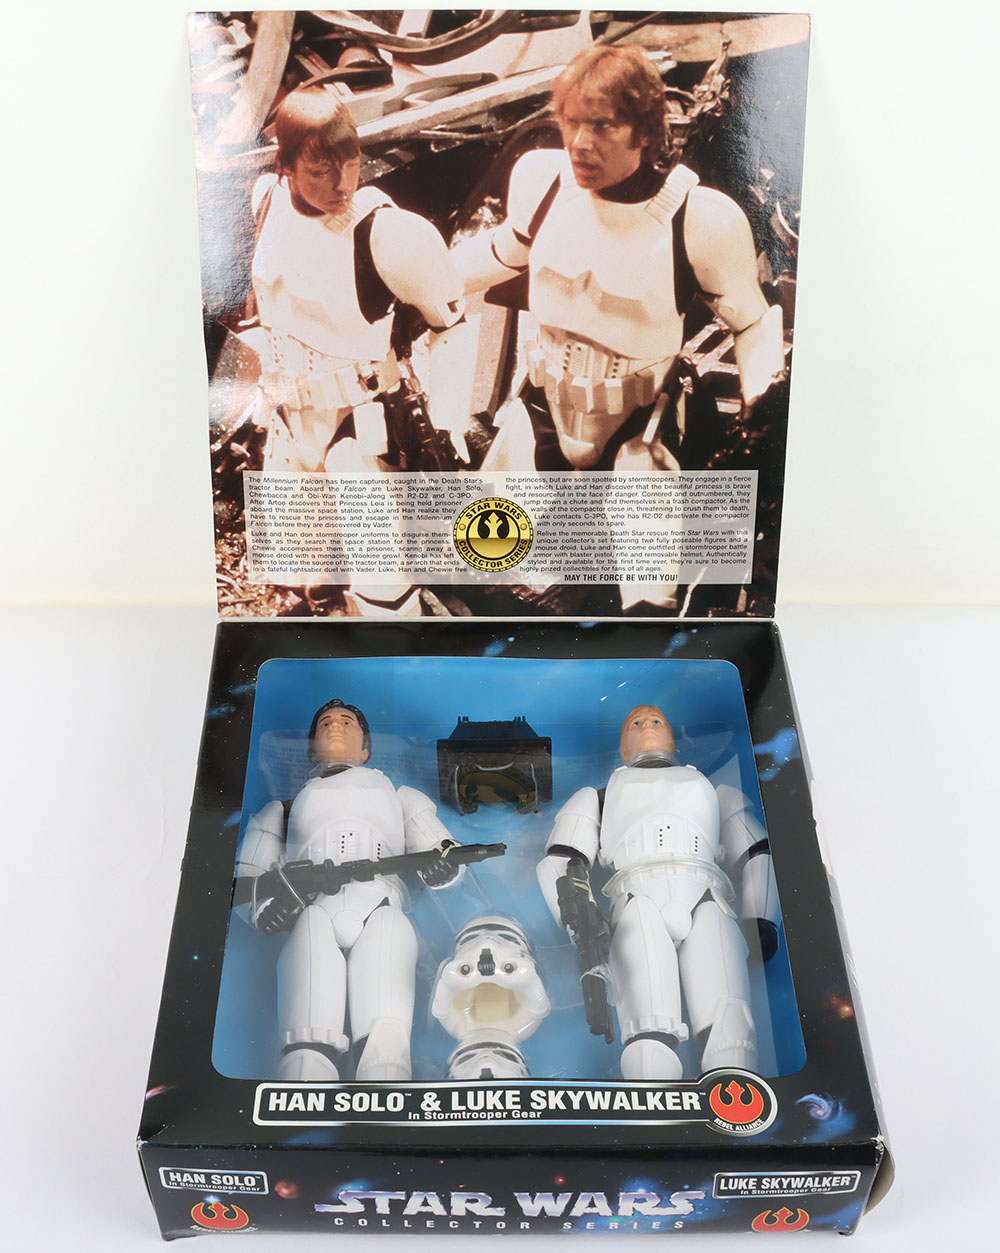 Star Wars Action Collection Kenner 1996-98 Wedge Antilles and Biggs Darklighter in Rebel Pilot Gear - Image 2 of 8